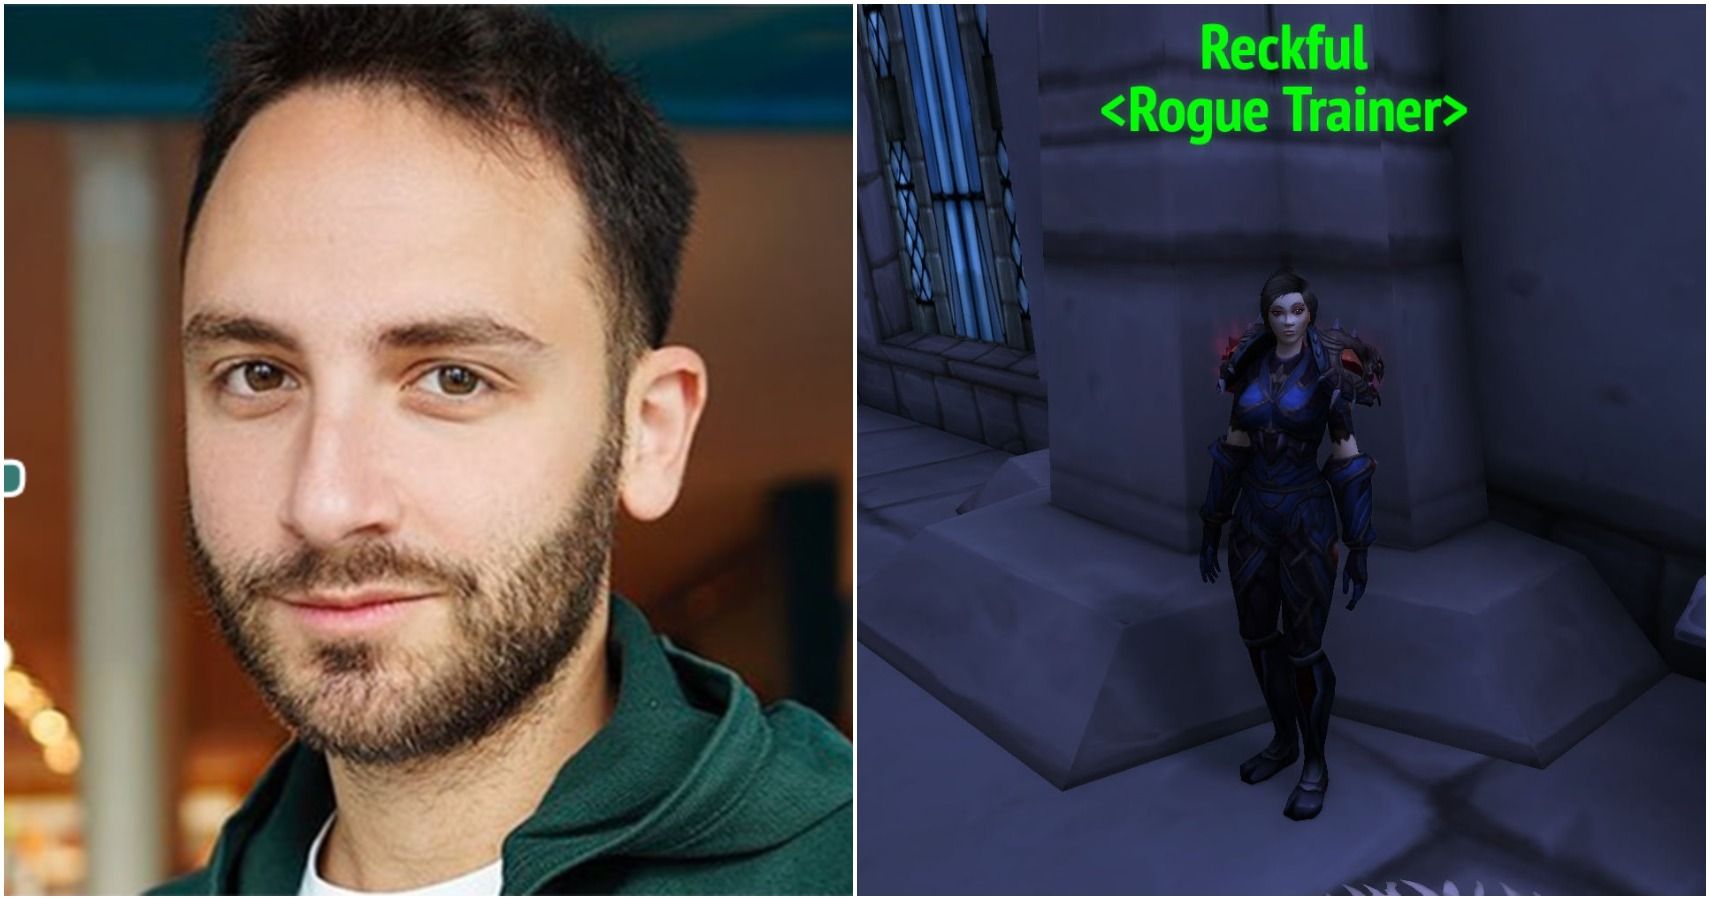 Blizzard Adds New Wow Npc To Memorialize Former Streamer Reckful - world of warcraft addon roblox death